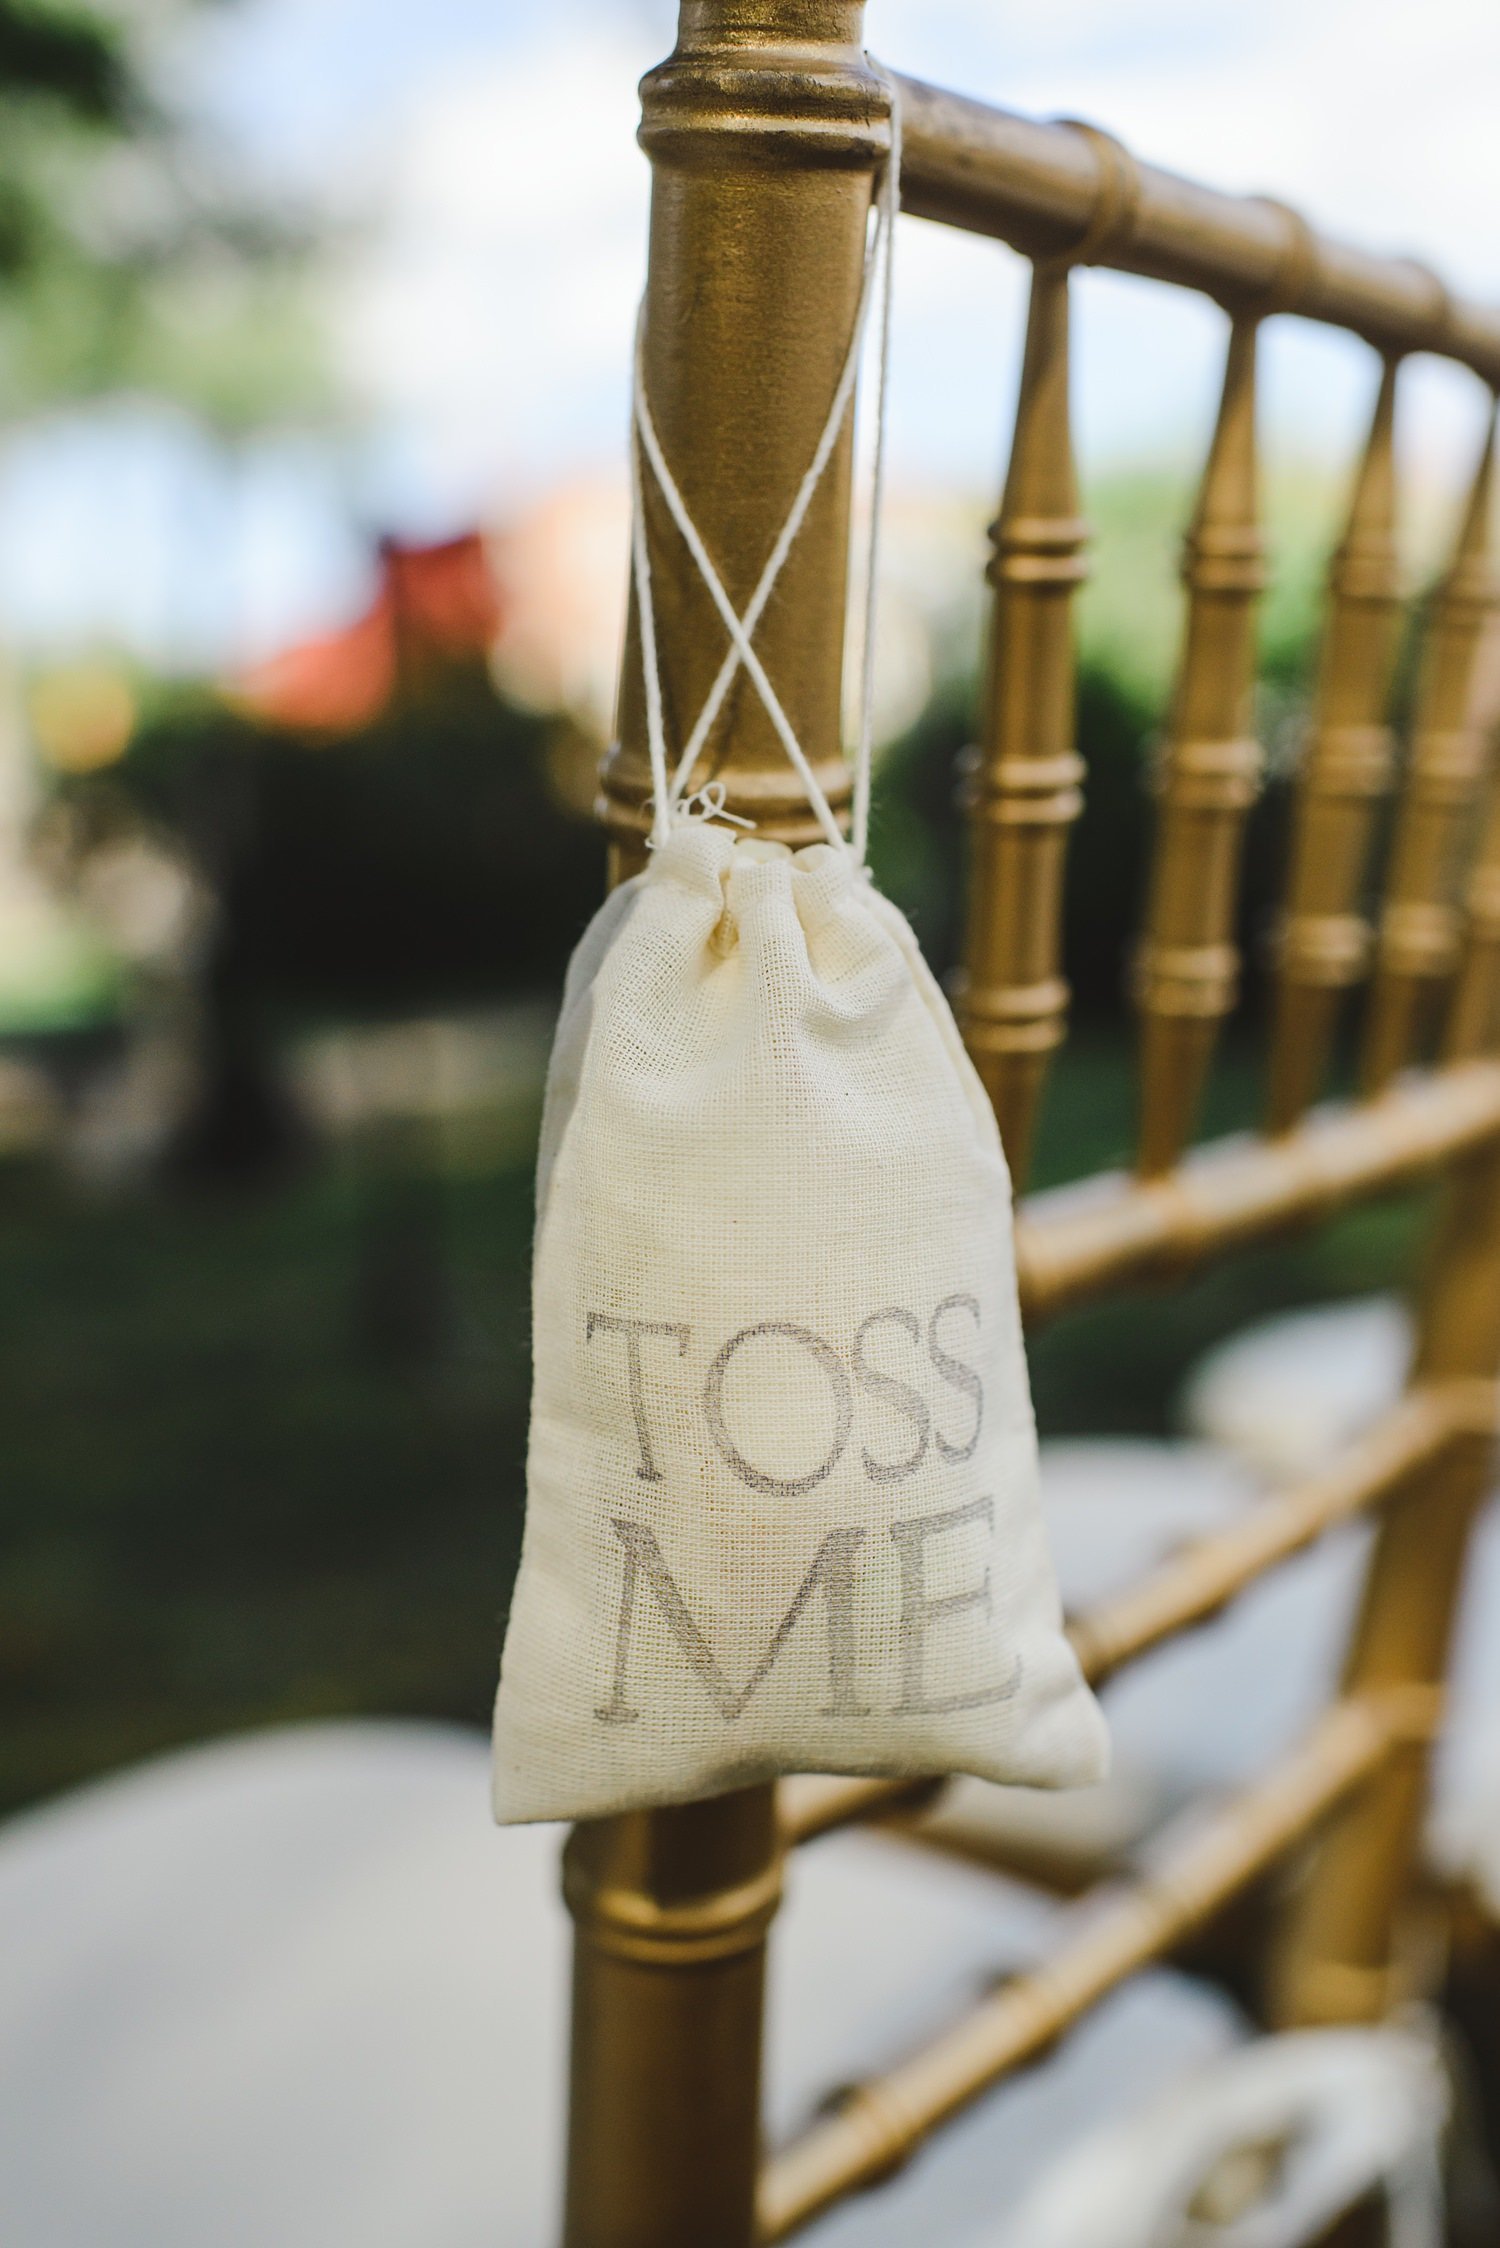 Toss me muslin ceremony toss bags at The Webb Barn in Wethersfield, CT